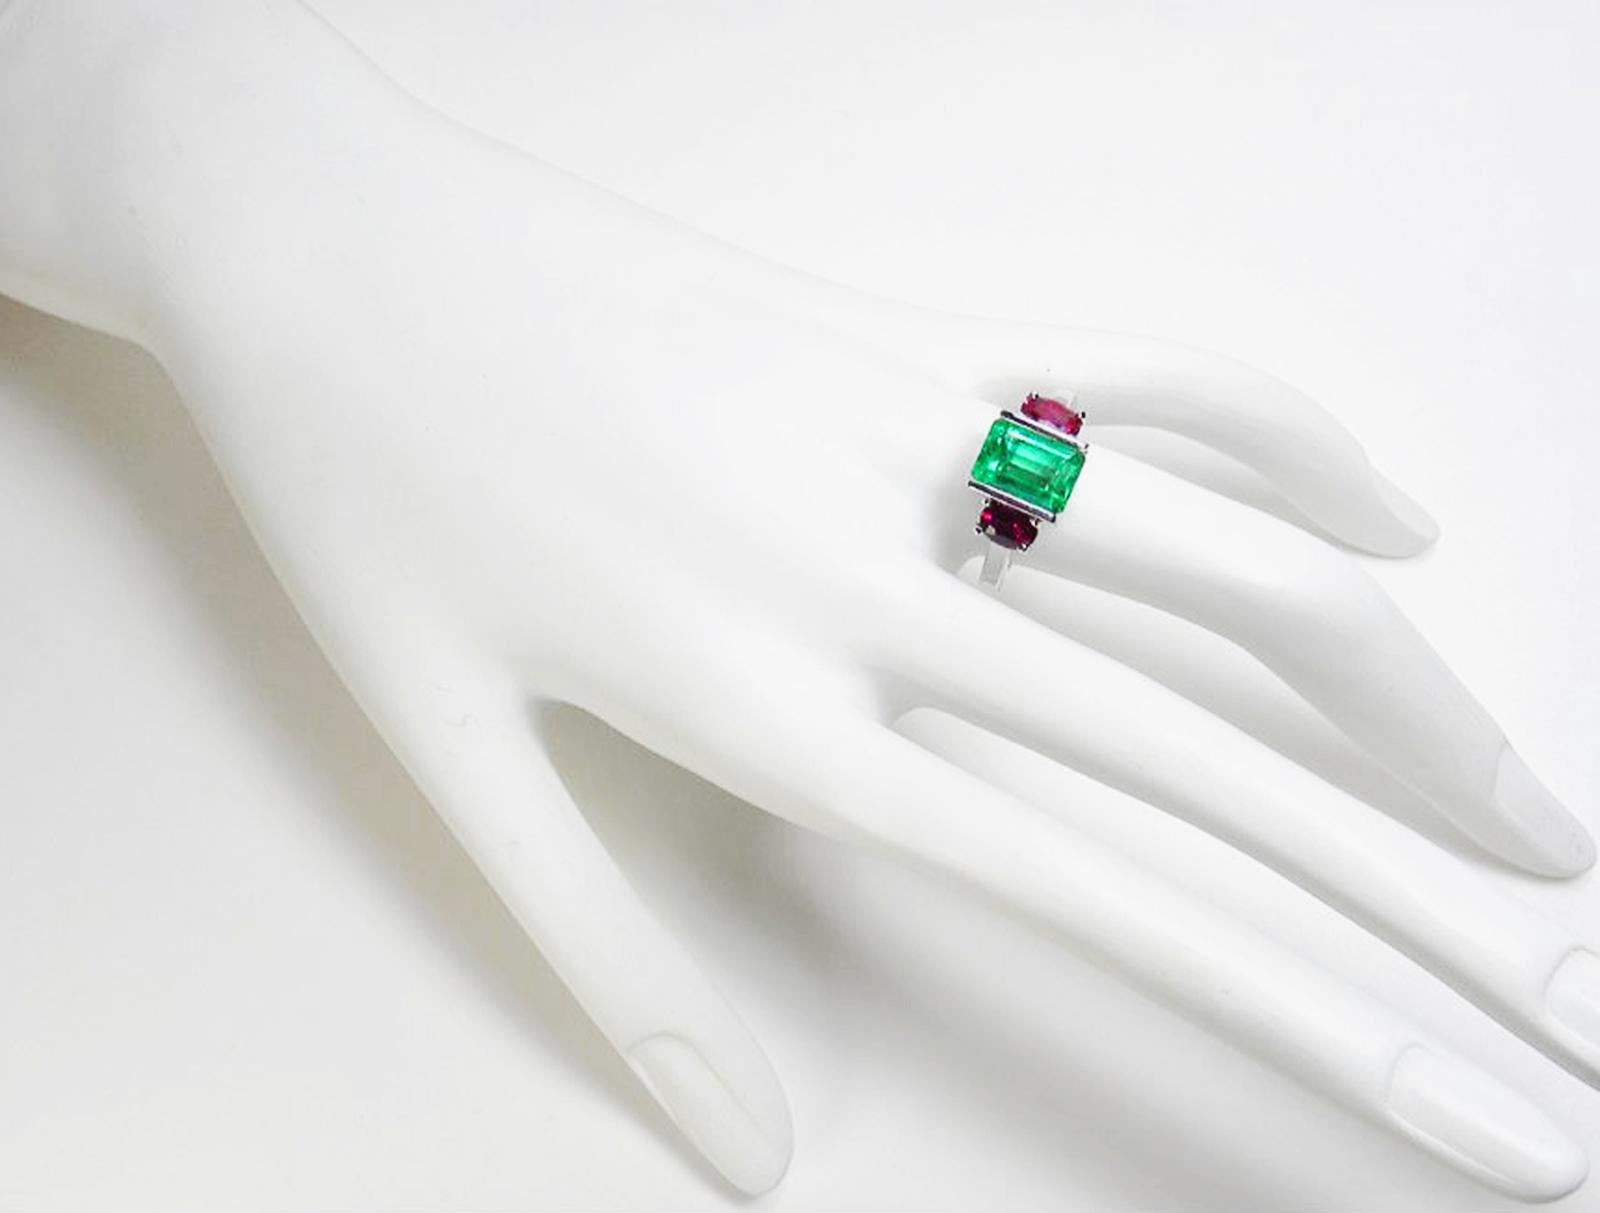 Composition: Solid White Gold 14K
Primary Stone: Natural Colombian Emerald
Shape or Cut: Emerald Cut
Approx Emerald Weight: Over 3.31 Carats (1 emeralds)
Treatment Emerald: no heat ~ Only Oil
Average Color/Clarity Emerald: Light Green/VS
Accent